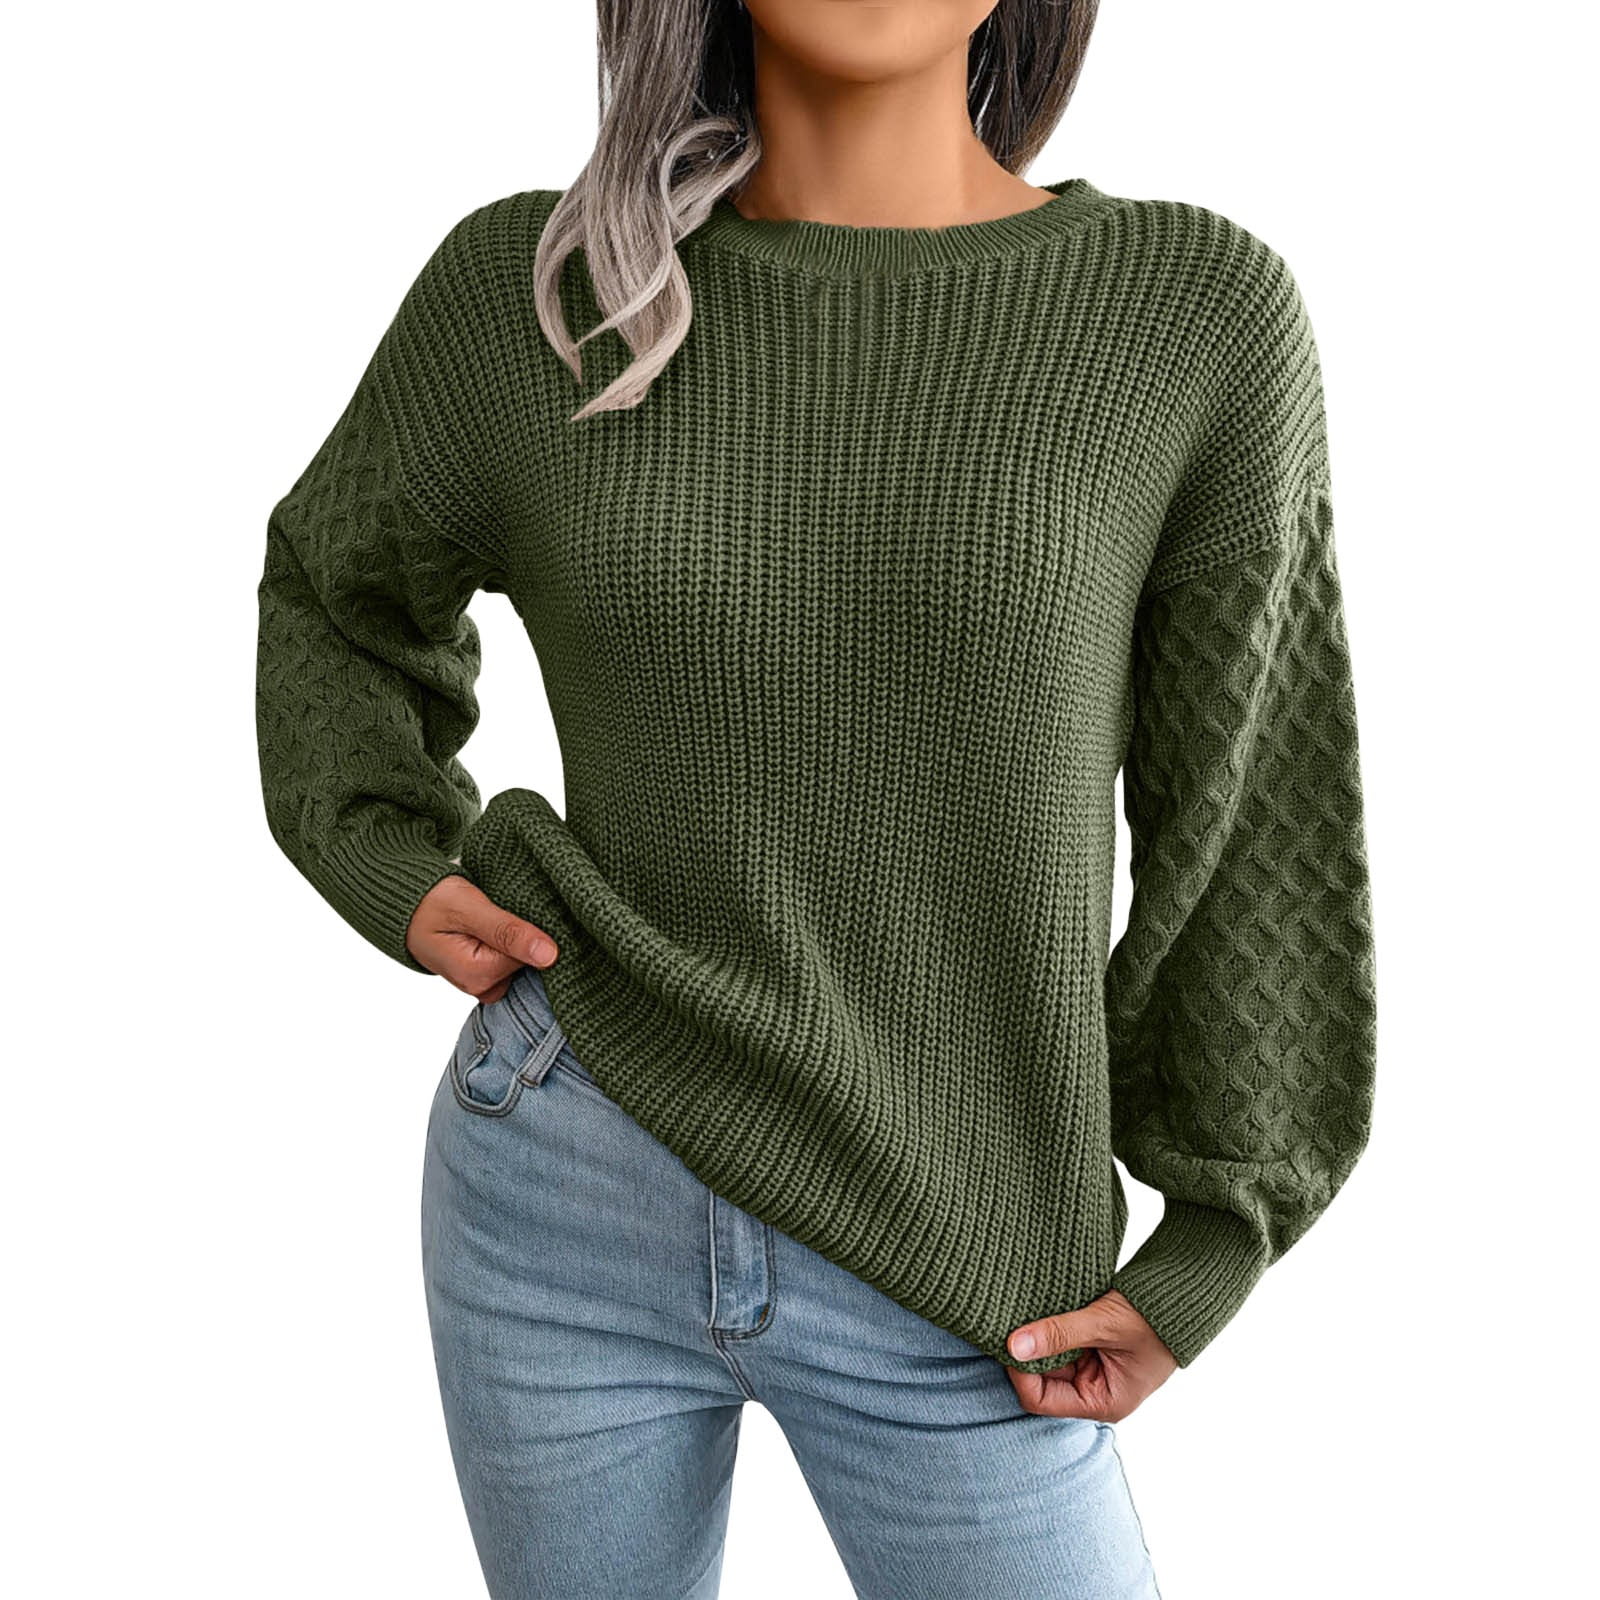 Ollysqiar Women Casual Long Sleeve Knitted Open Front Fashion Loose  Elegant,wholesale items,customer service chat,clothes,gifts under 10  dollars for women